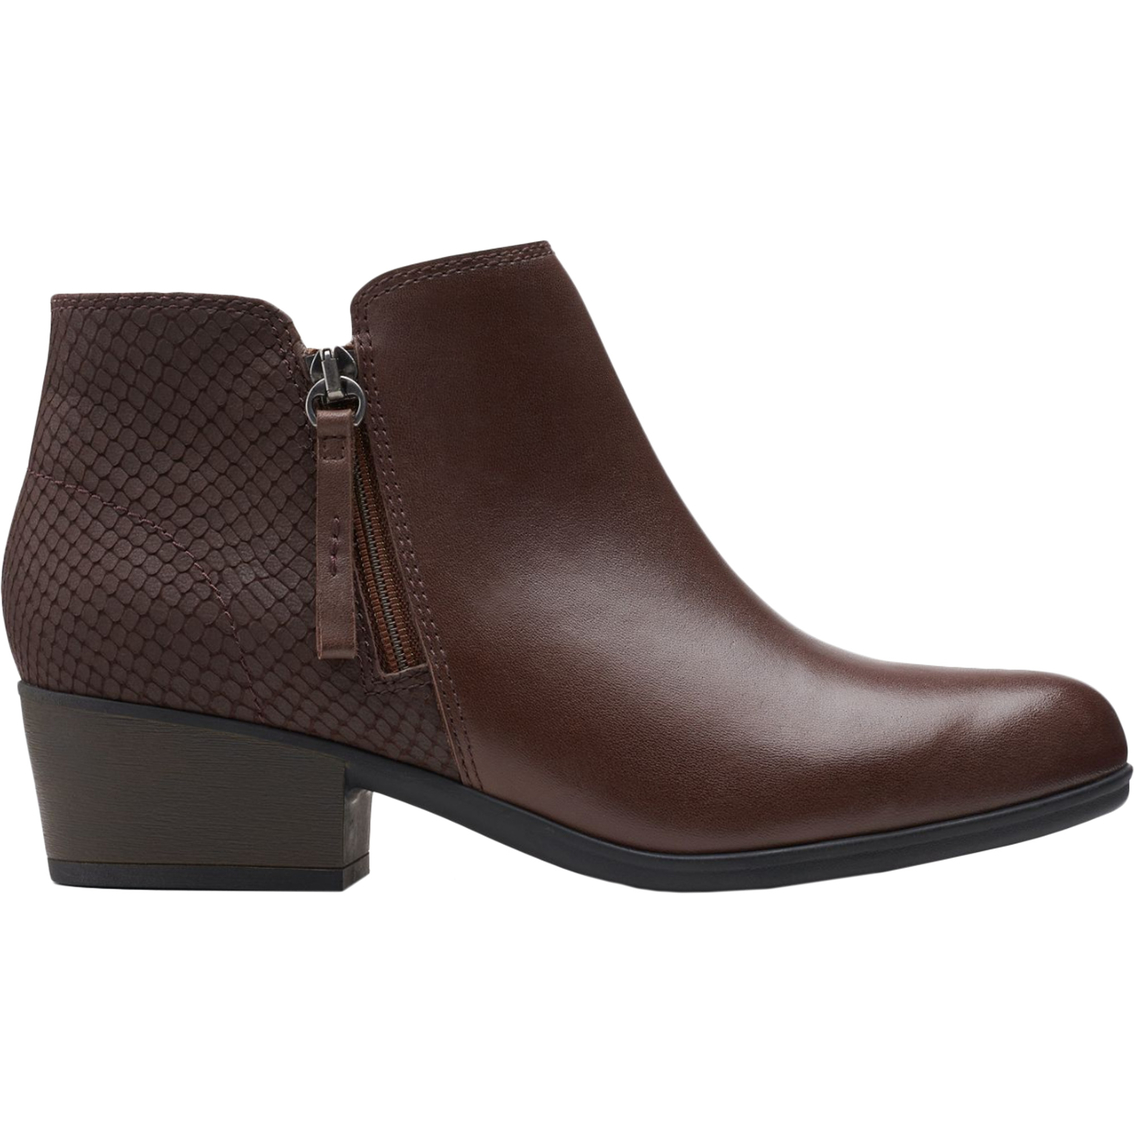 Clarks Women's Adreena Hope Ankle Boots | Booties | Shoes | Shop The ...